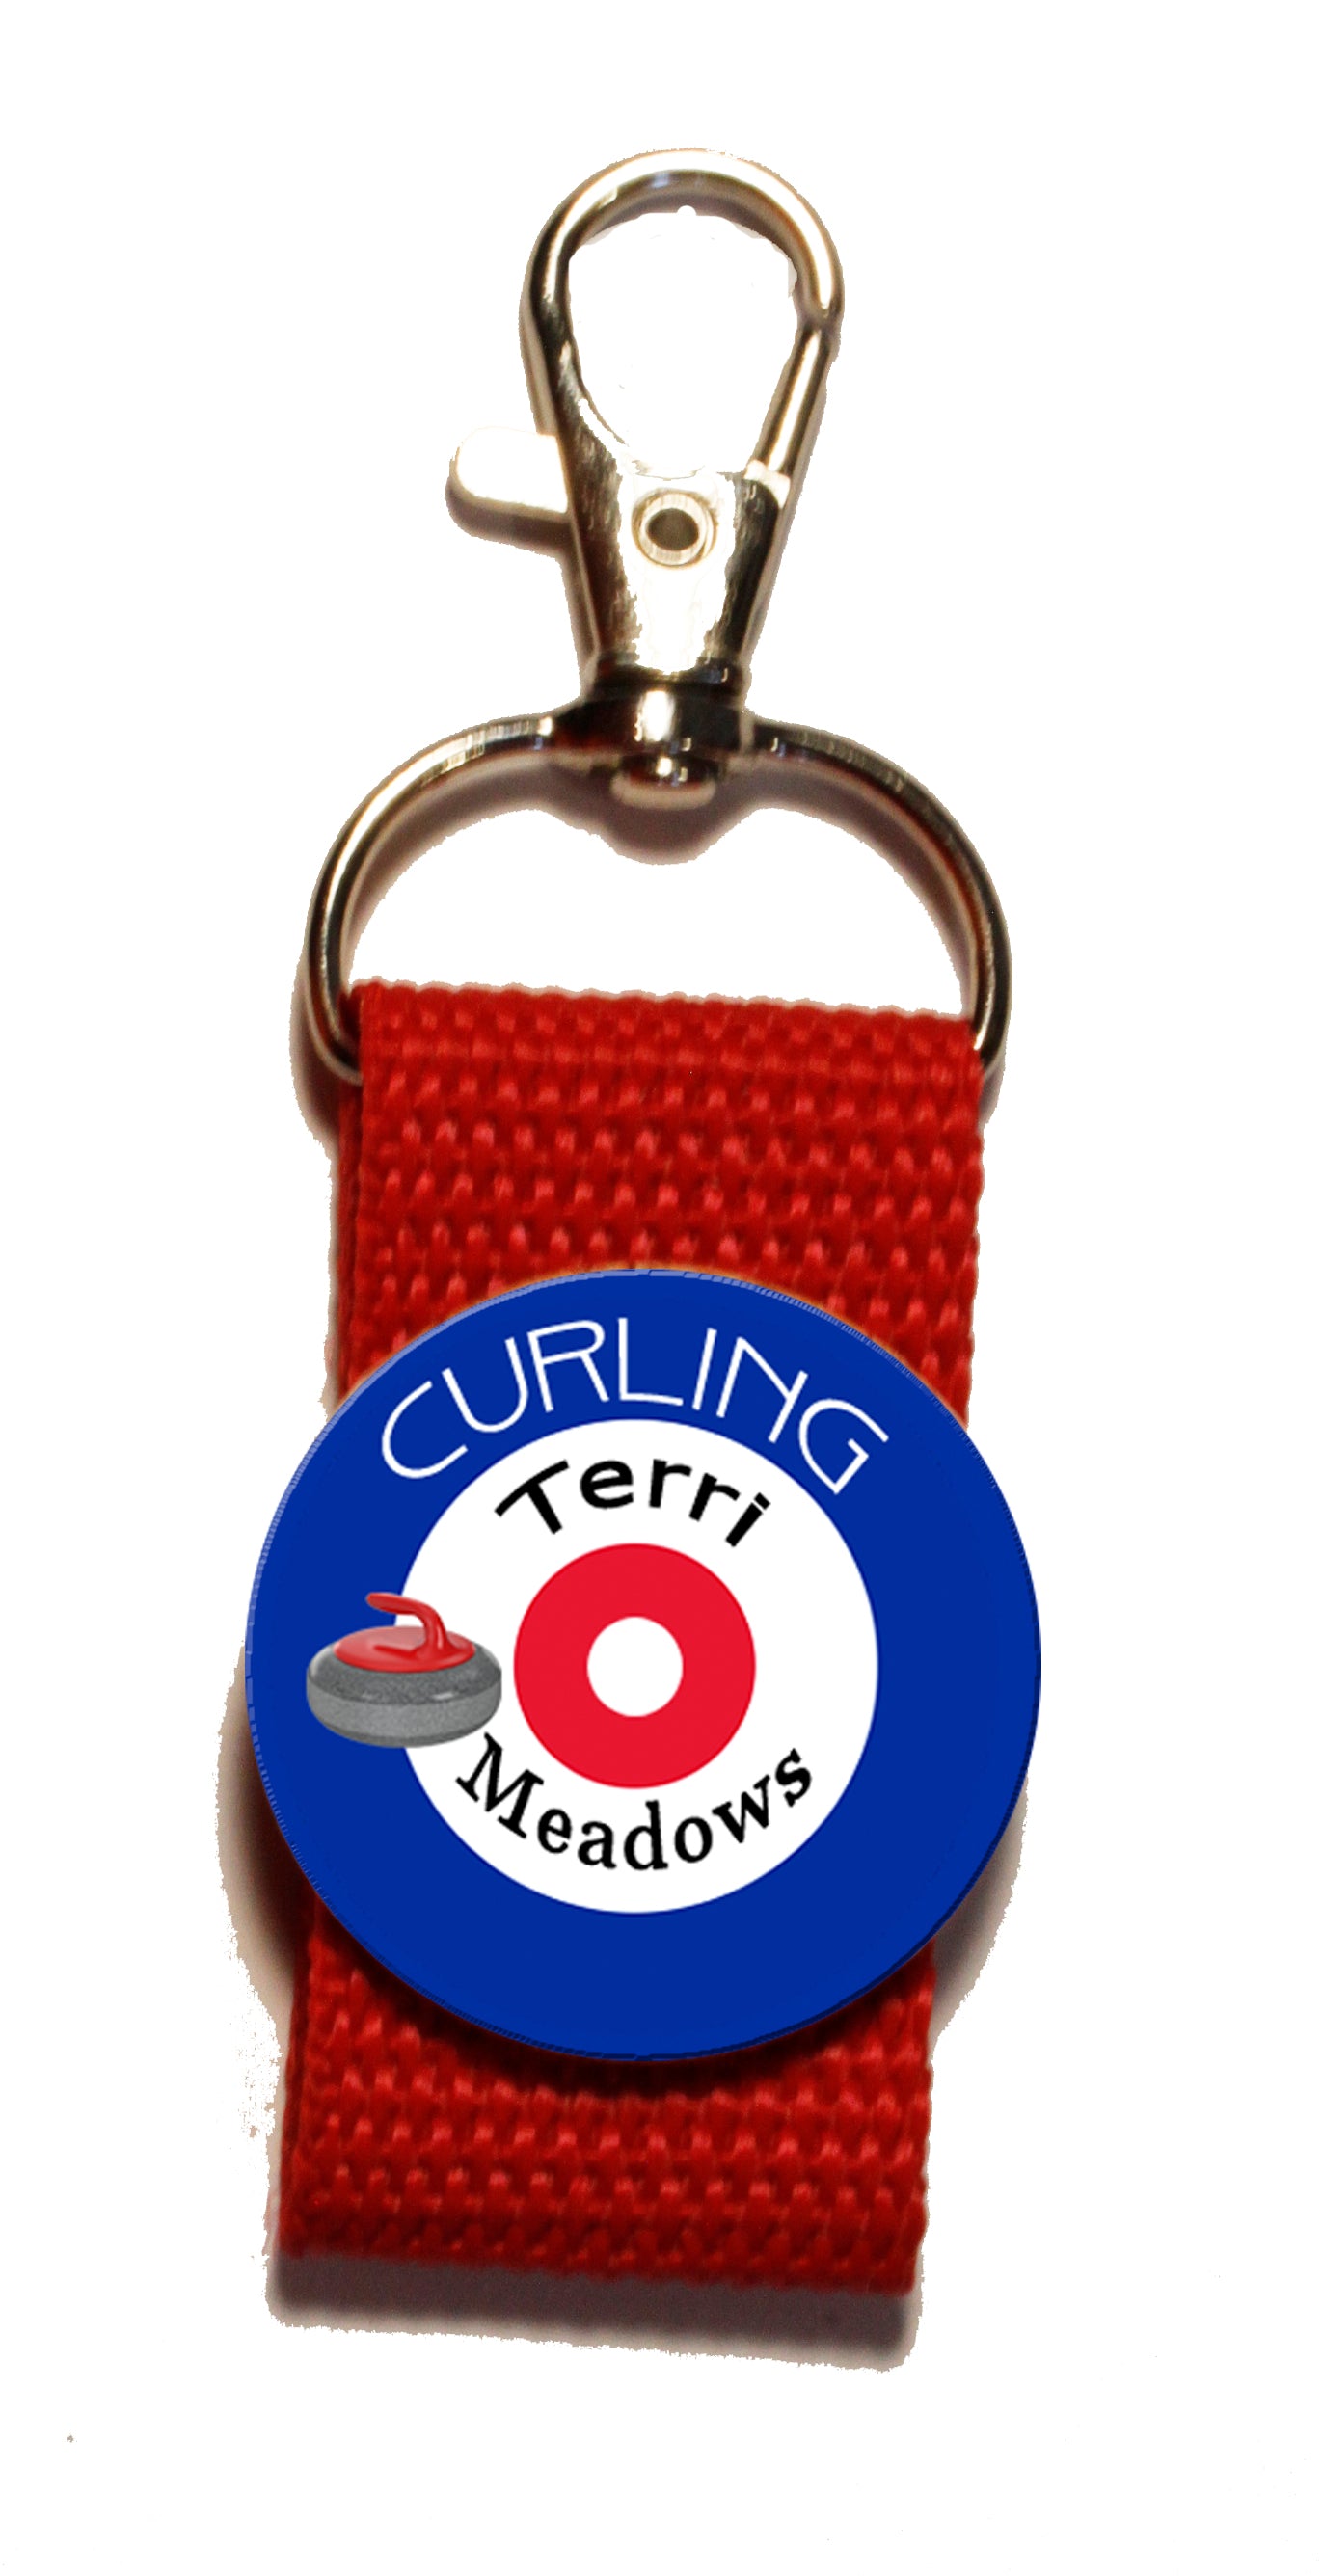 Curling Zipper Pull Personalized with name You choose strap color